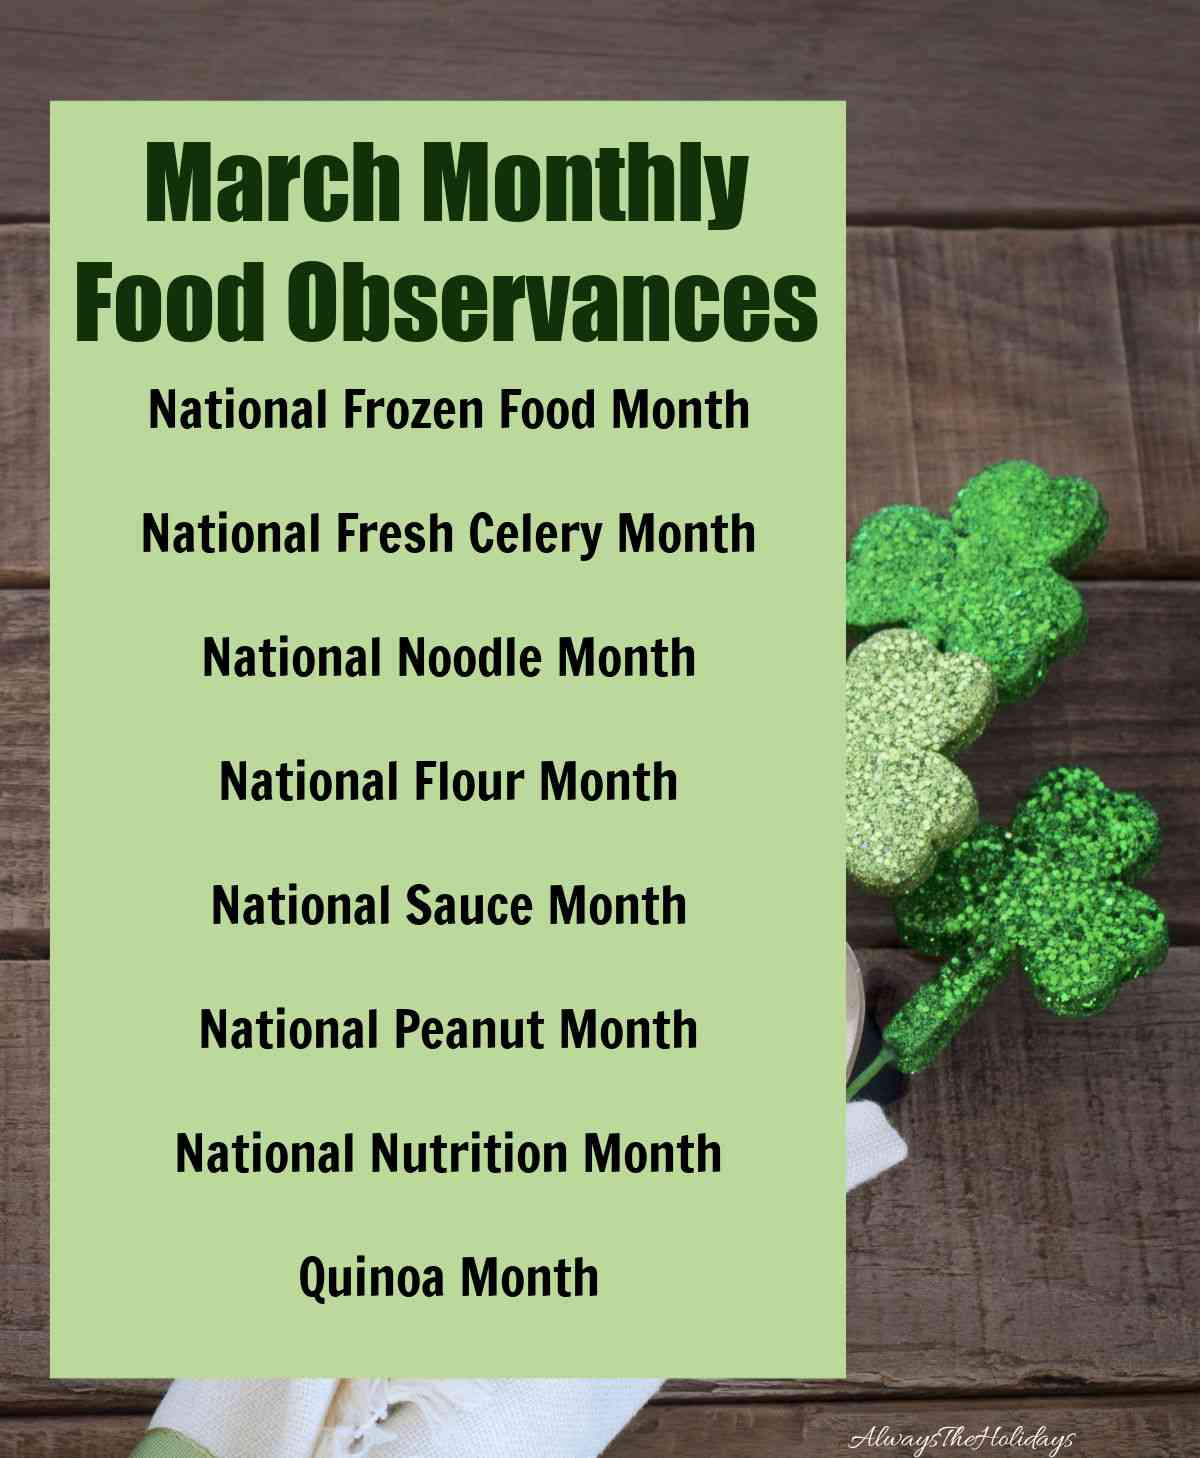 Shamrocks on a wood board with a list of March monthly food observances.